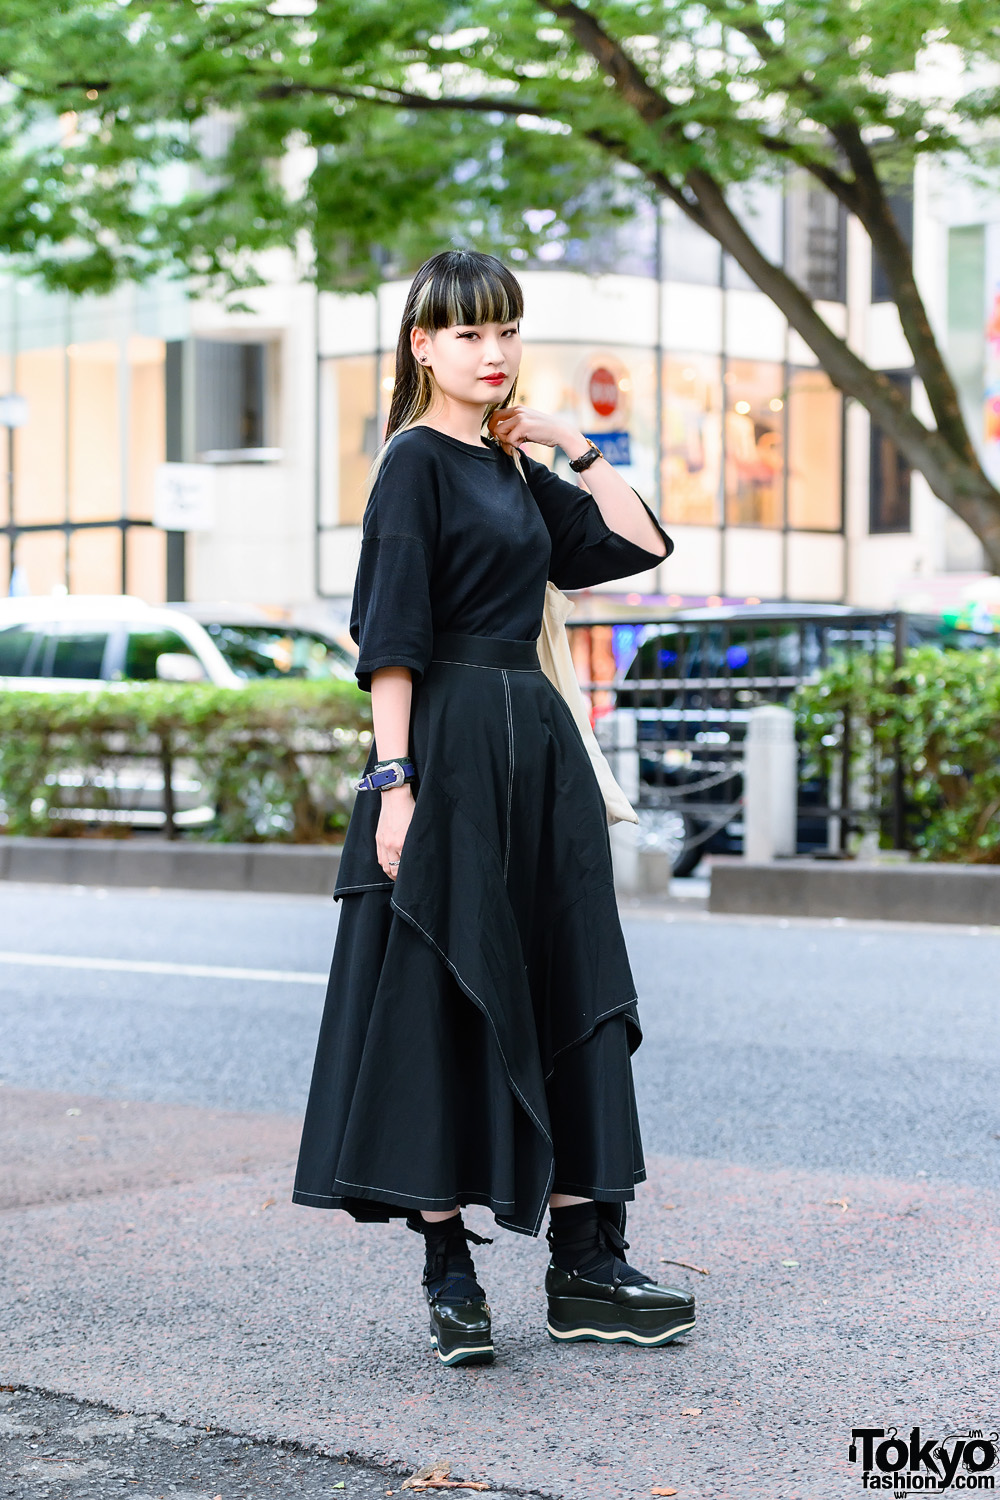 Fashion Designer in All Black Outfit w/ Black Shirt, Ujoh Tiered Long Skirt, Paloma Barcelo Wedge Shoes & Toga Accessories